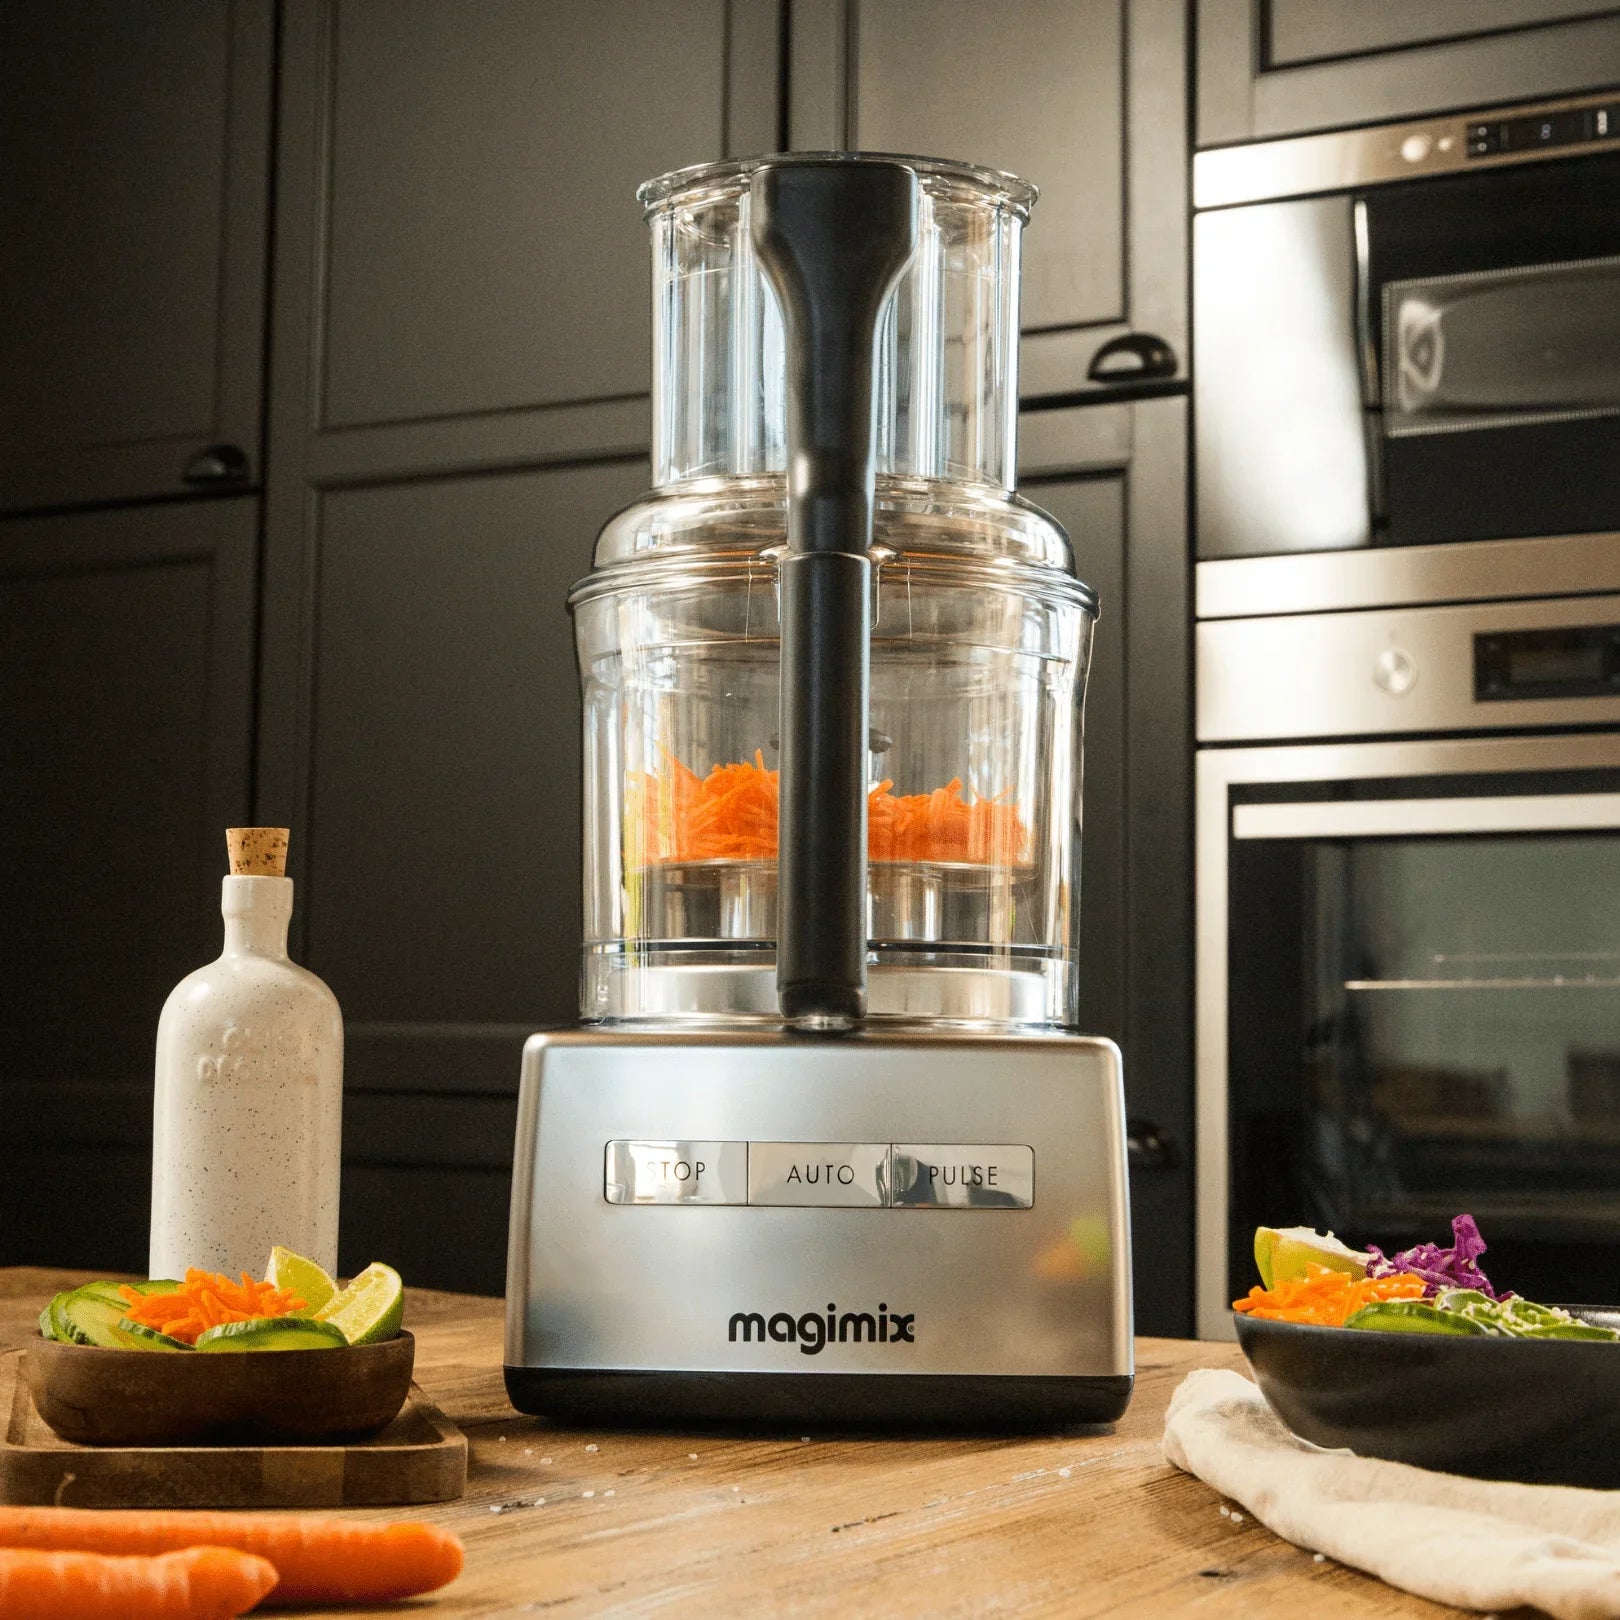 Buy Food Processors Online from Cookinex